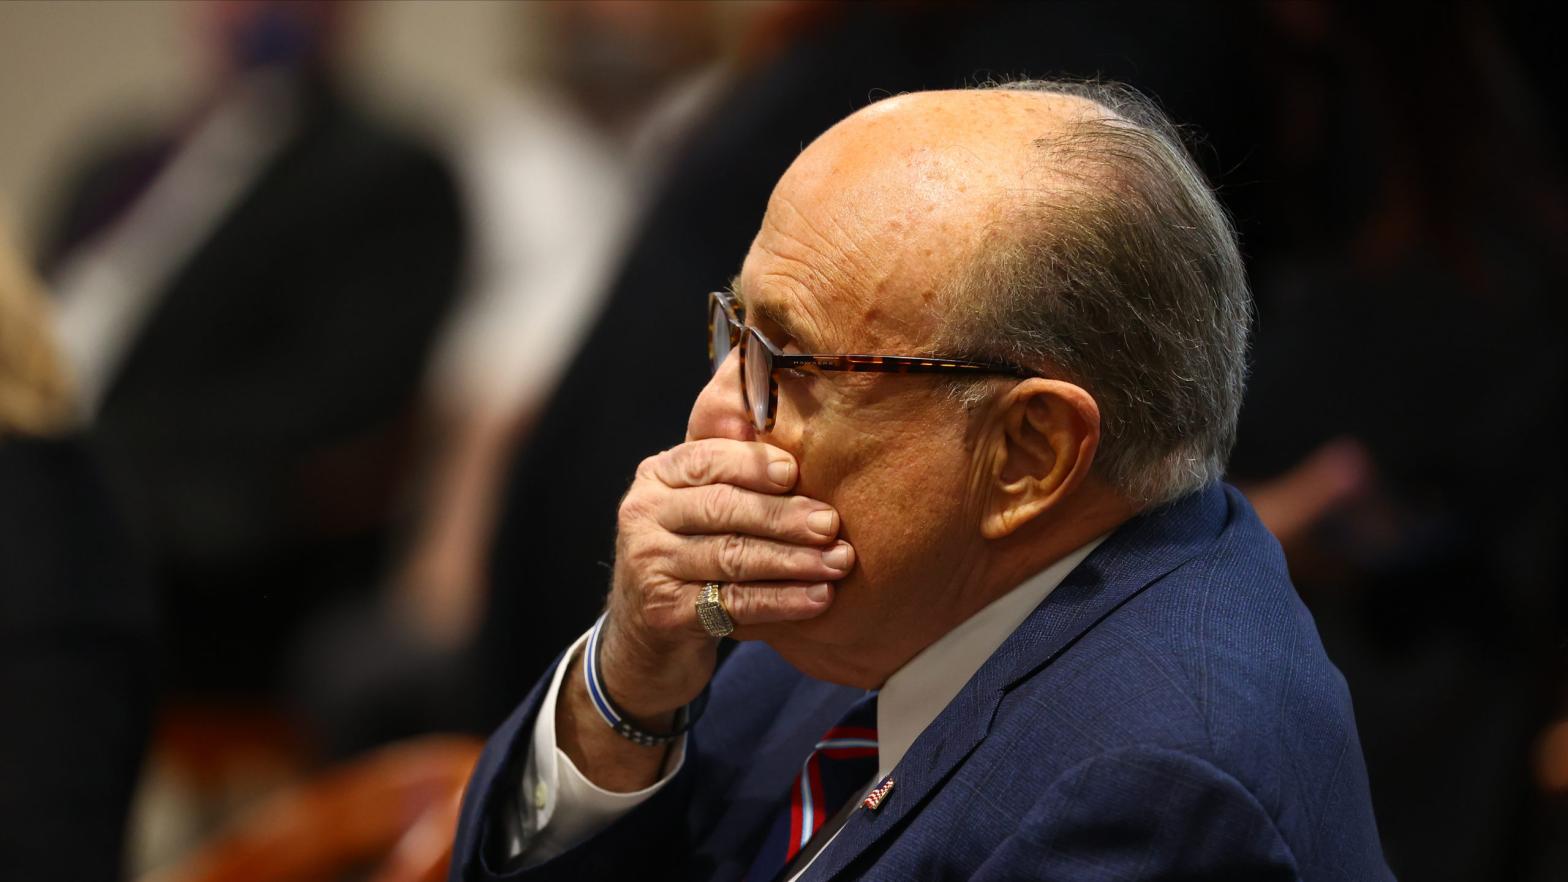 U.S. President Donald Trump's personal attorney Rudy Giuliani waits to testify before the Michigan House Oversight Committee on December 2, 2020 in Lansing, Michigan. (Photo: Rey Del Rio, Getty Images)